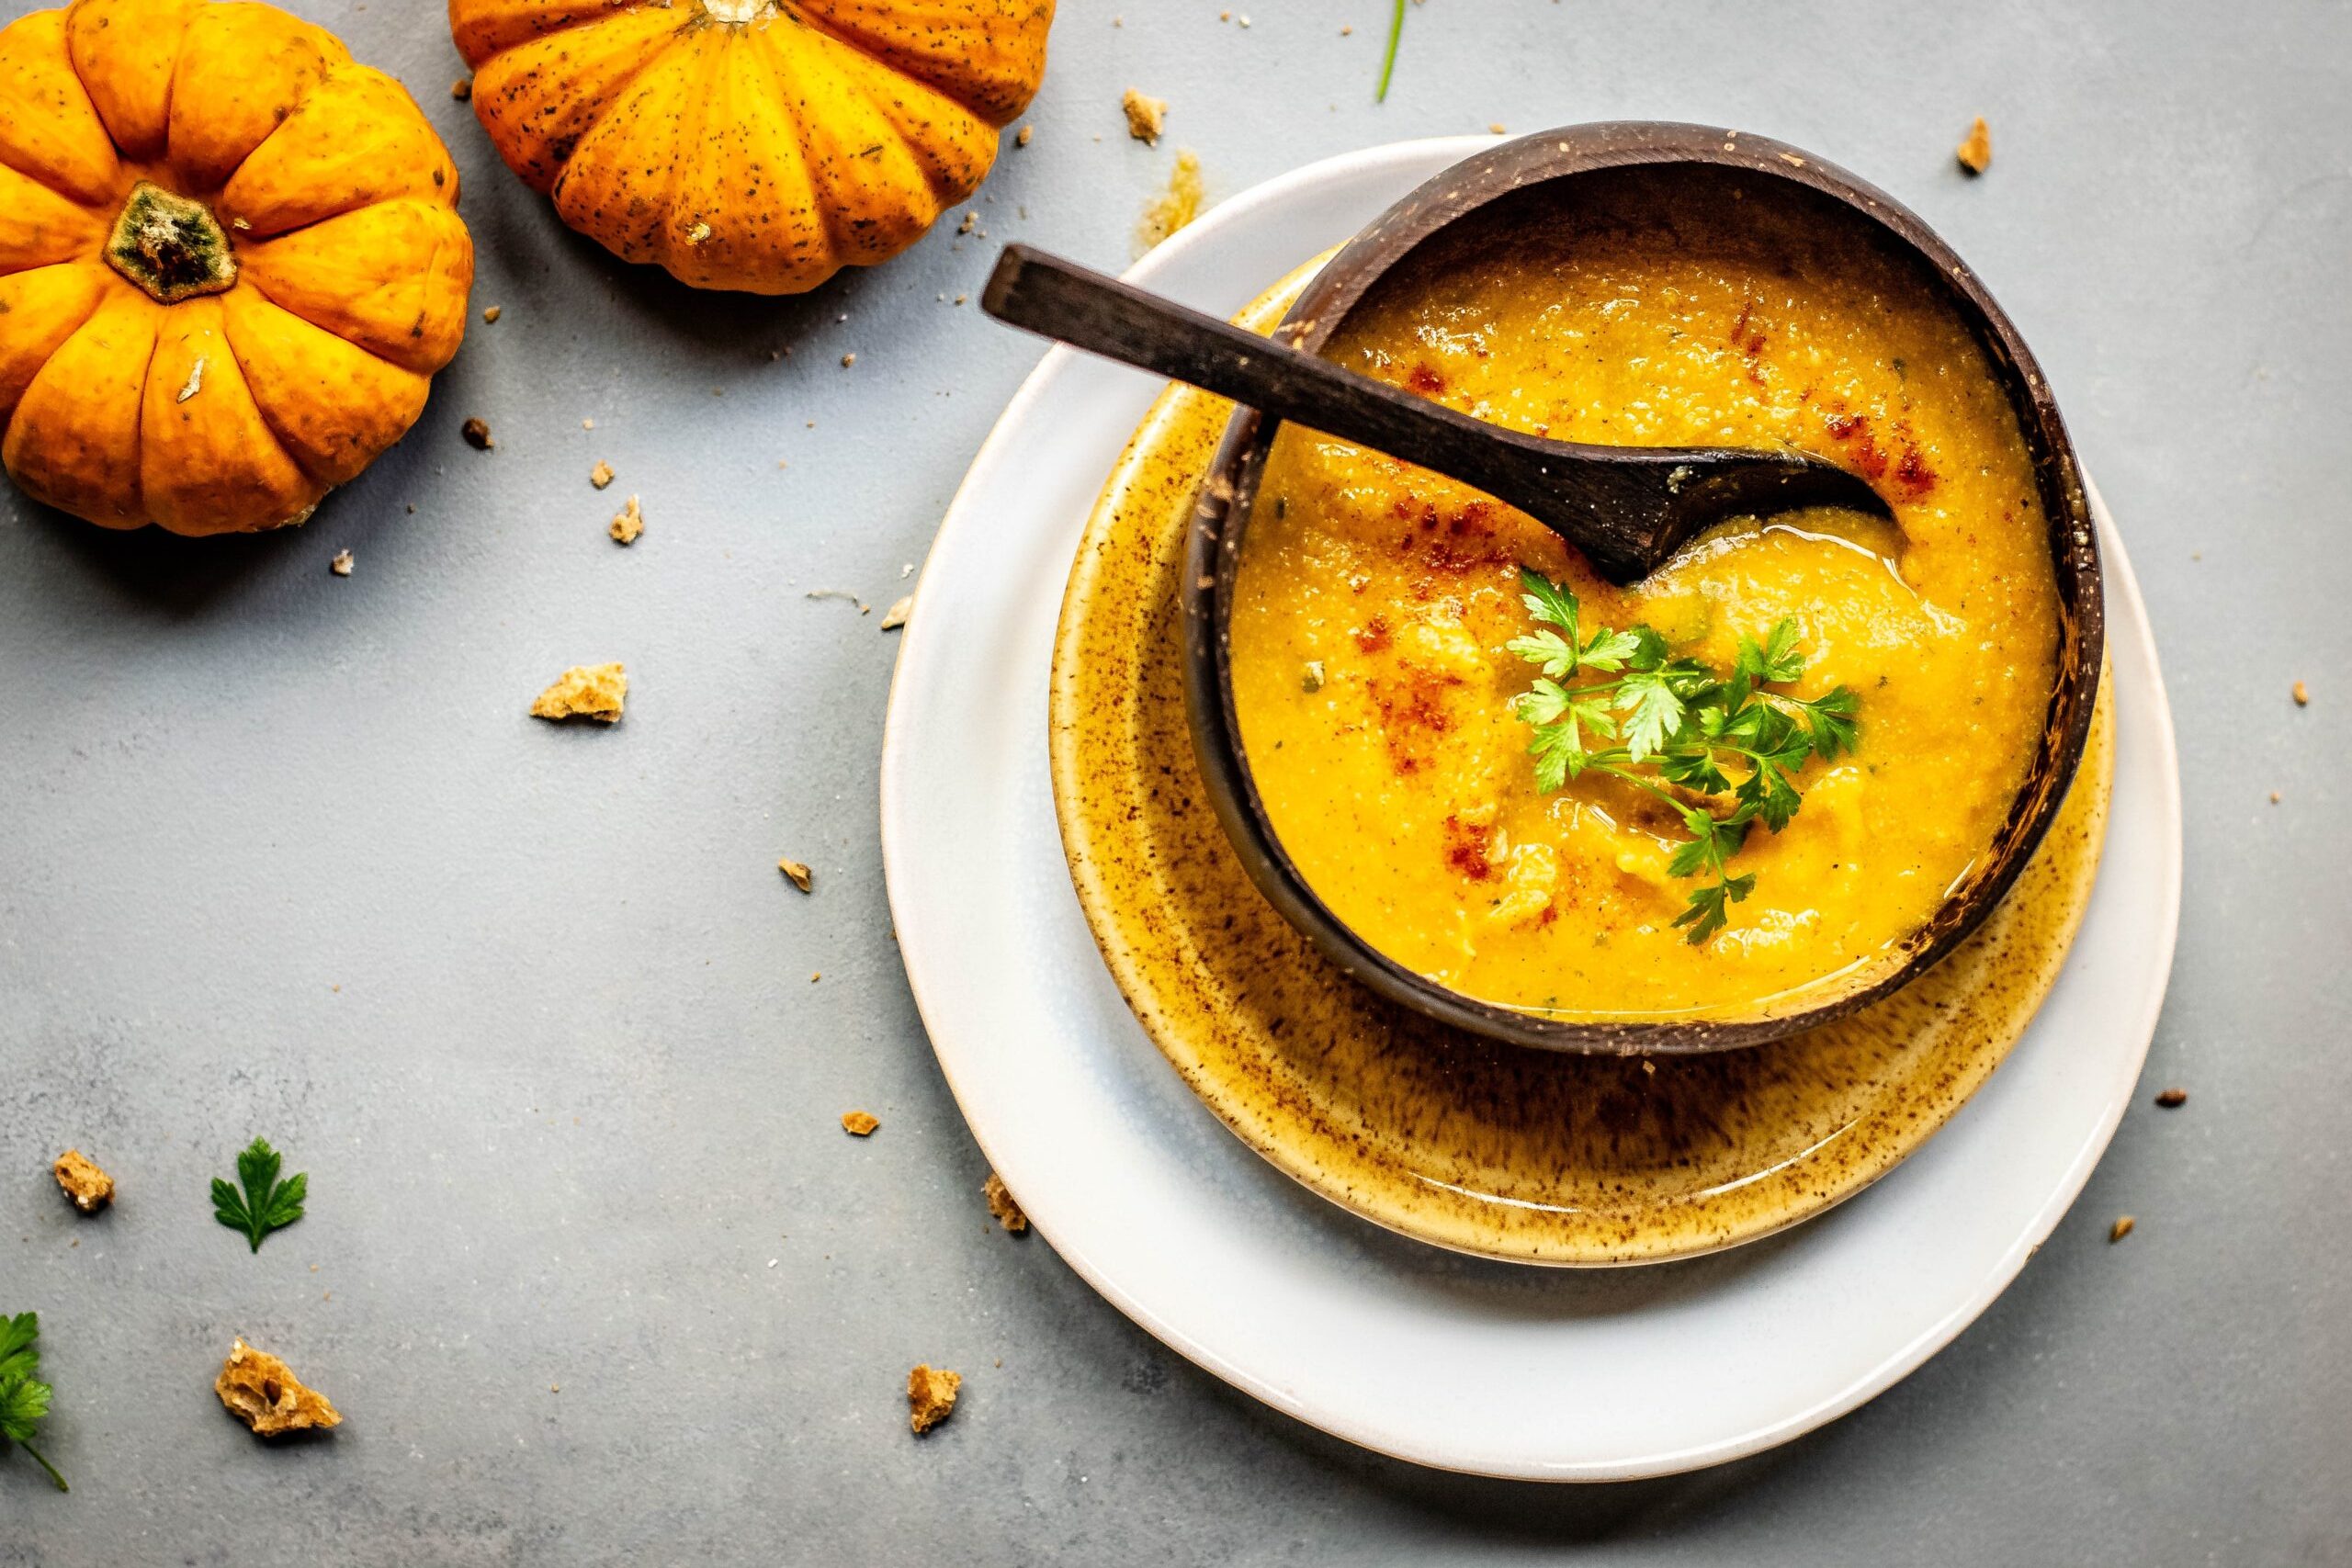 A generous bowl of orange soup, speckled with greek herbs and red seasoning, rests atop two plates, one yellow and the larger one white. In the upper left corner are two smaller pumpkins.